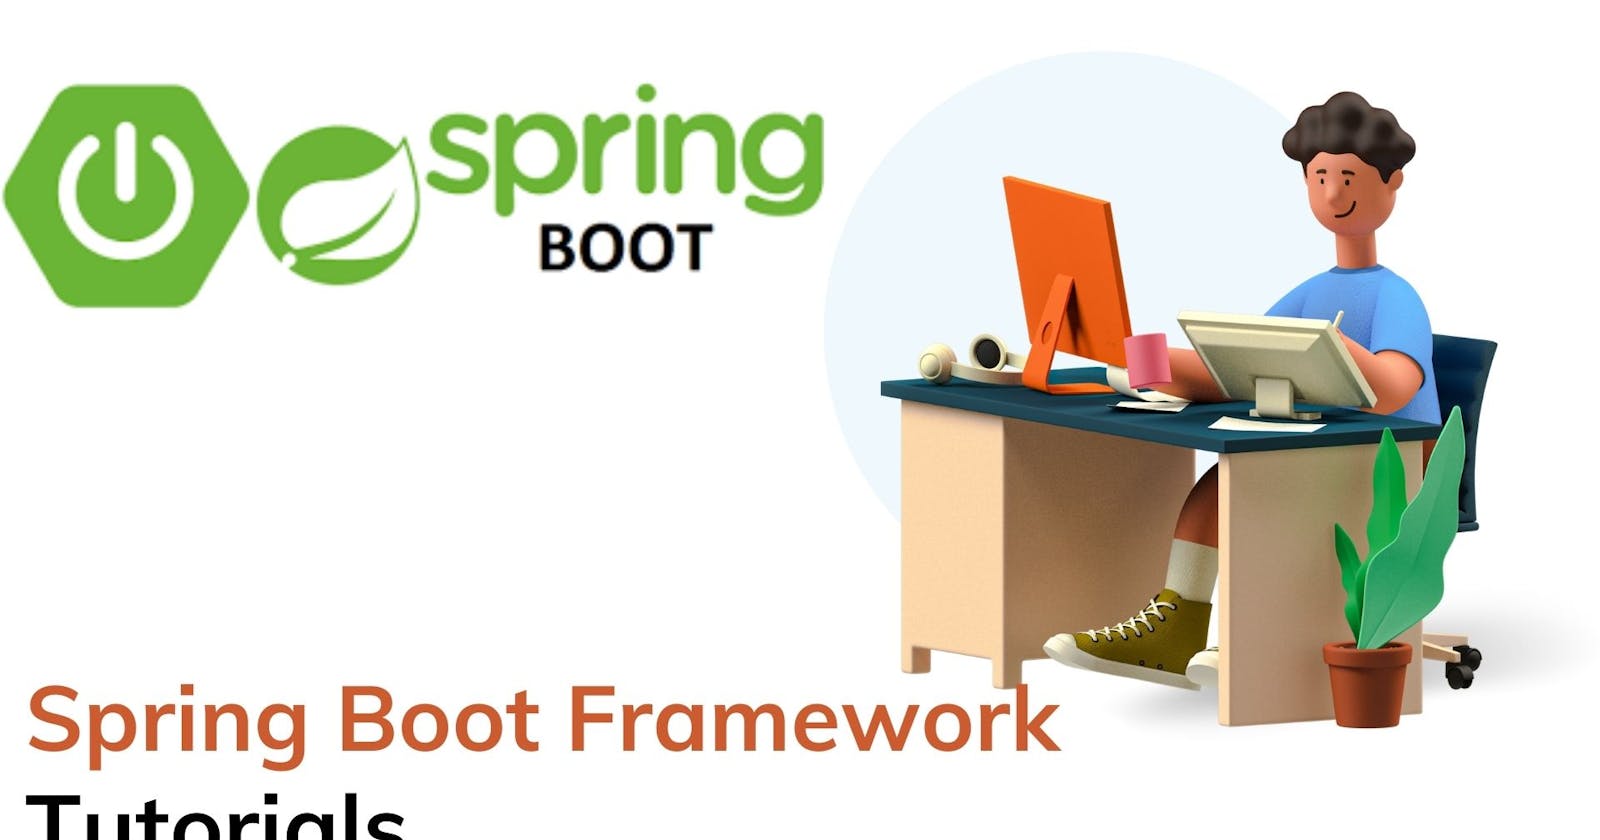 Profiles in Spring Boot - Developers must Know!